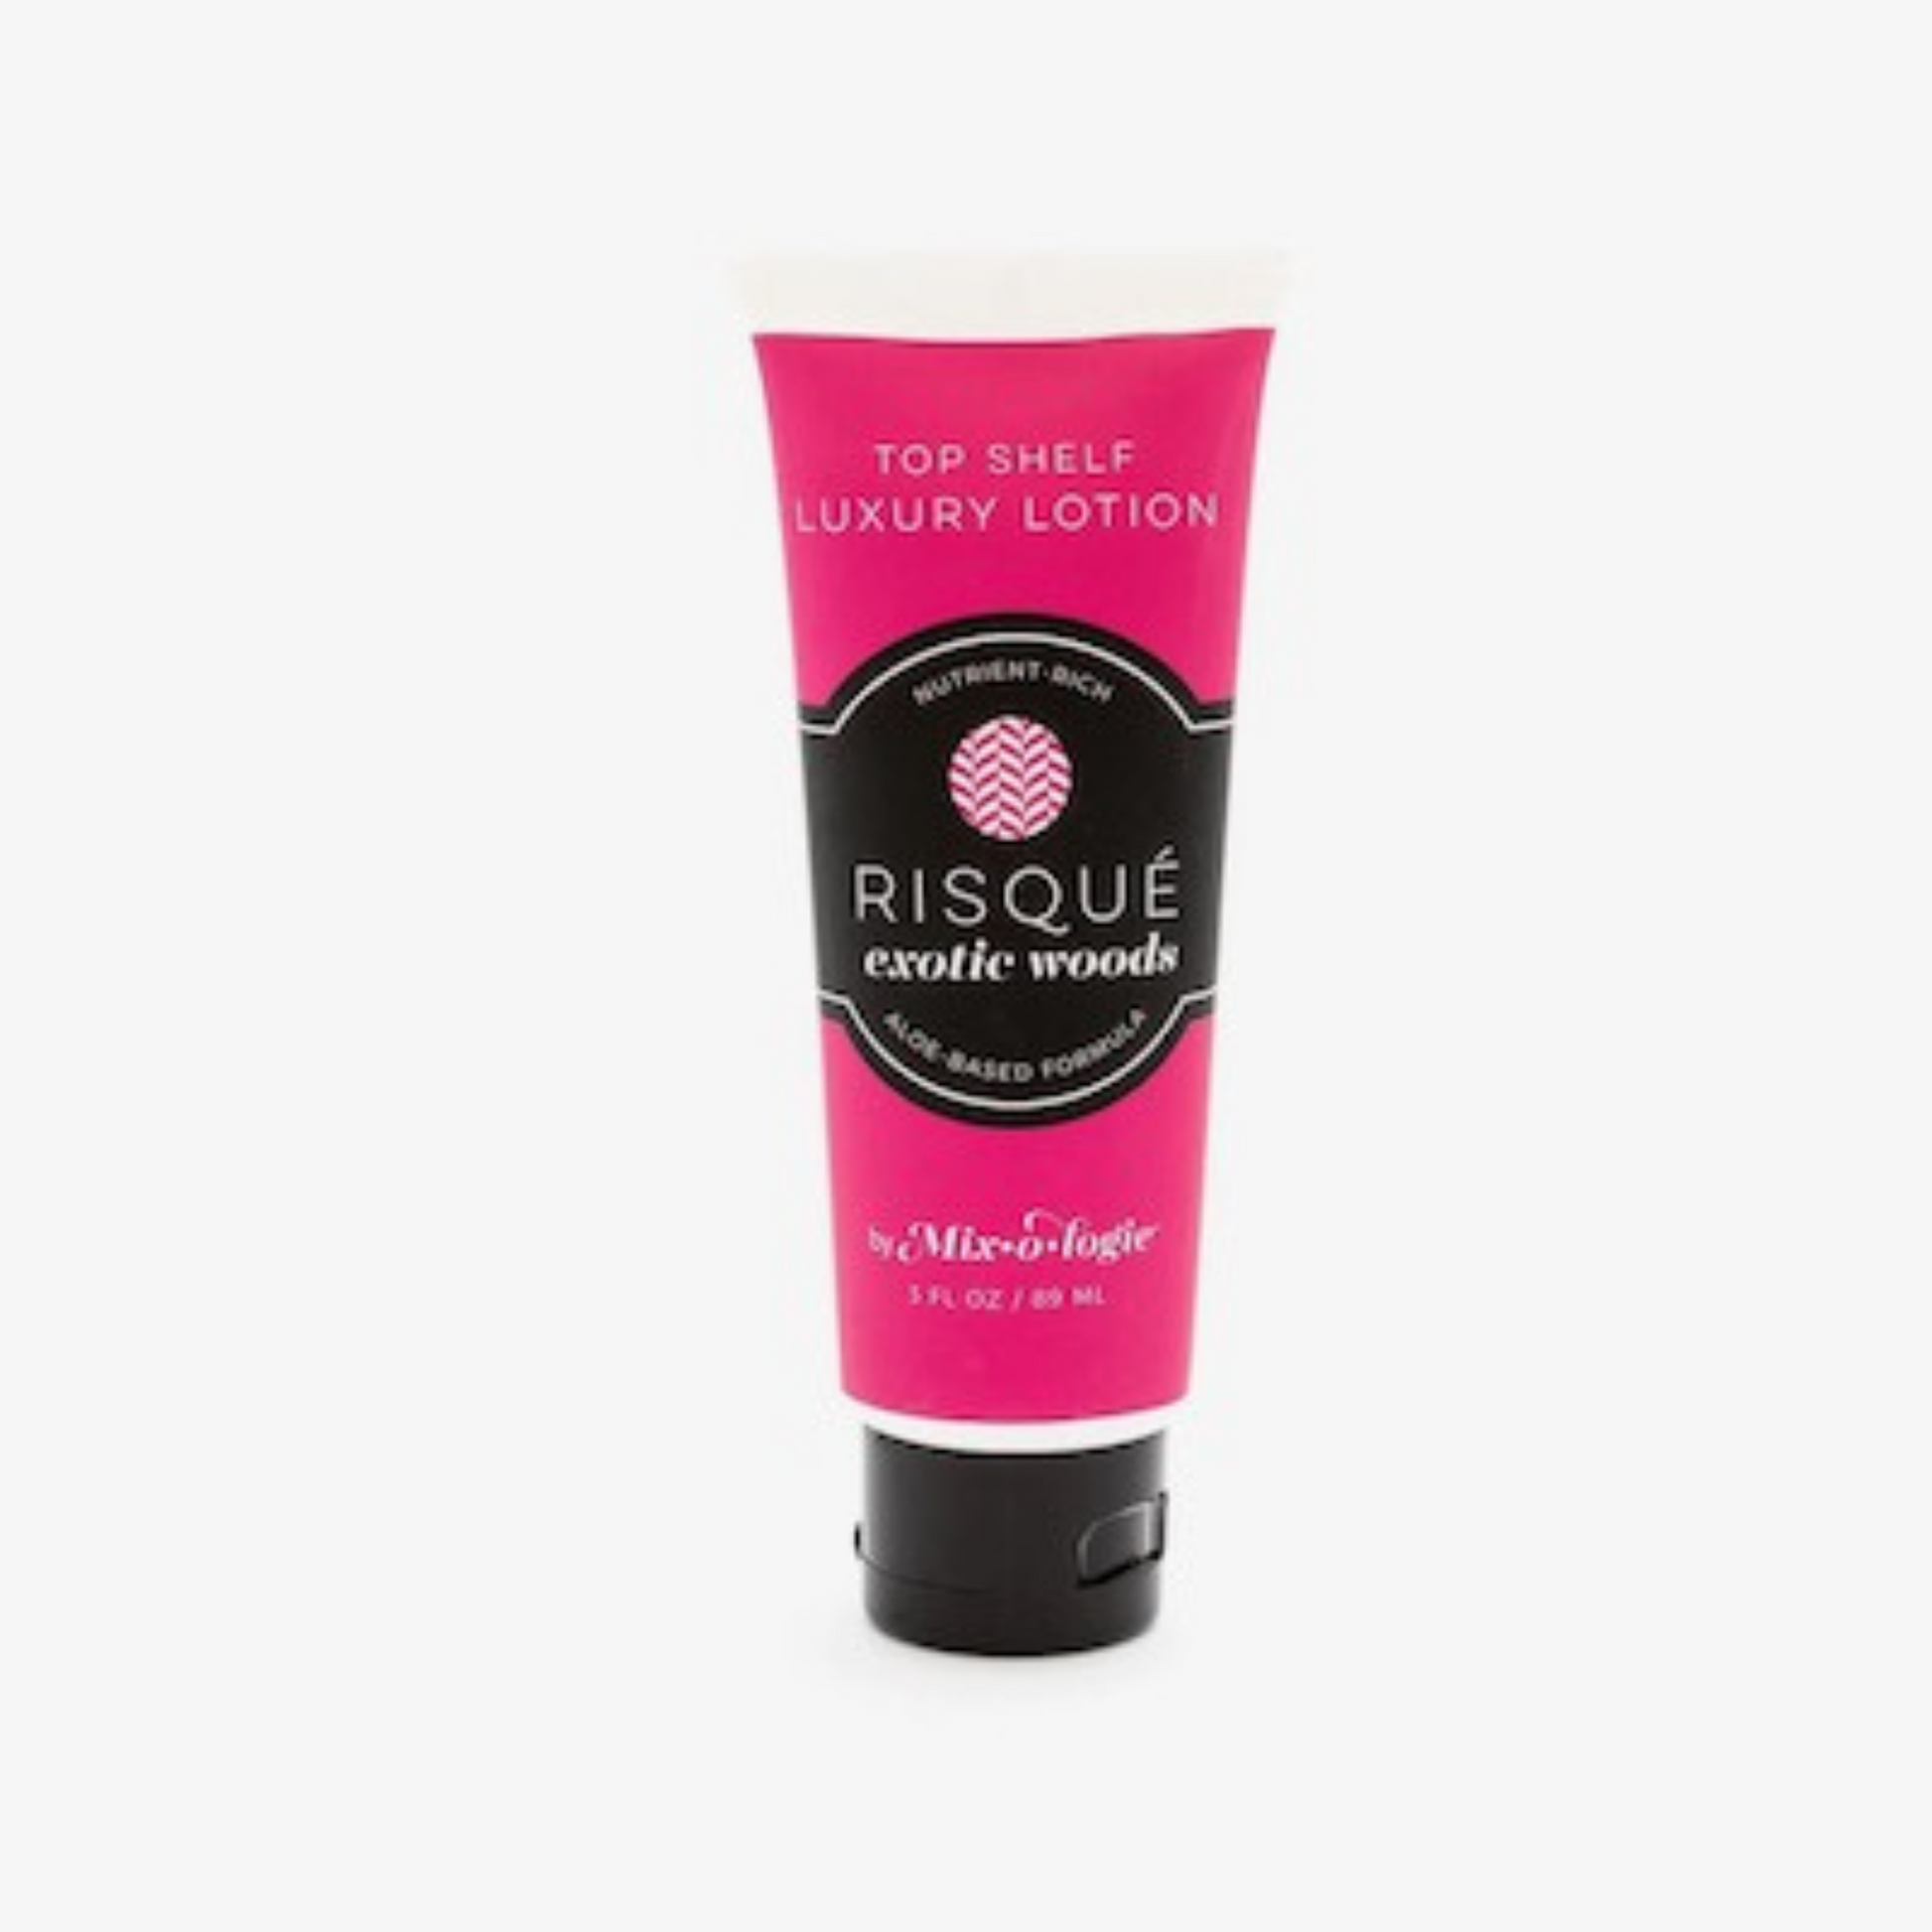 Top shelf luxury lotion in risque